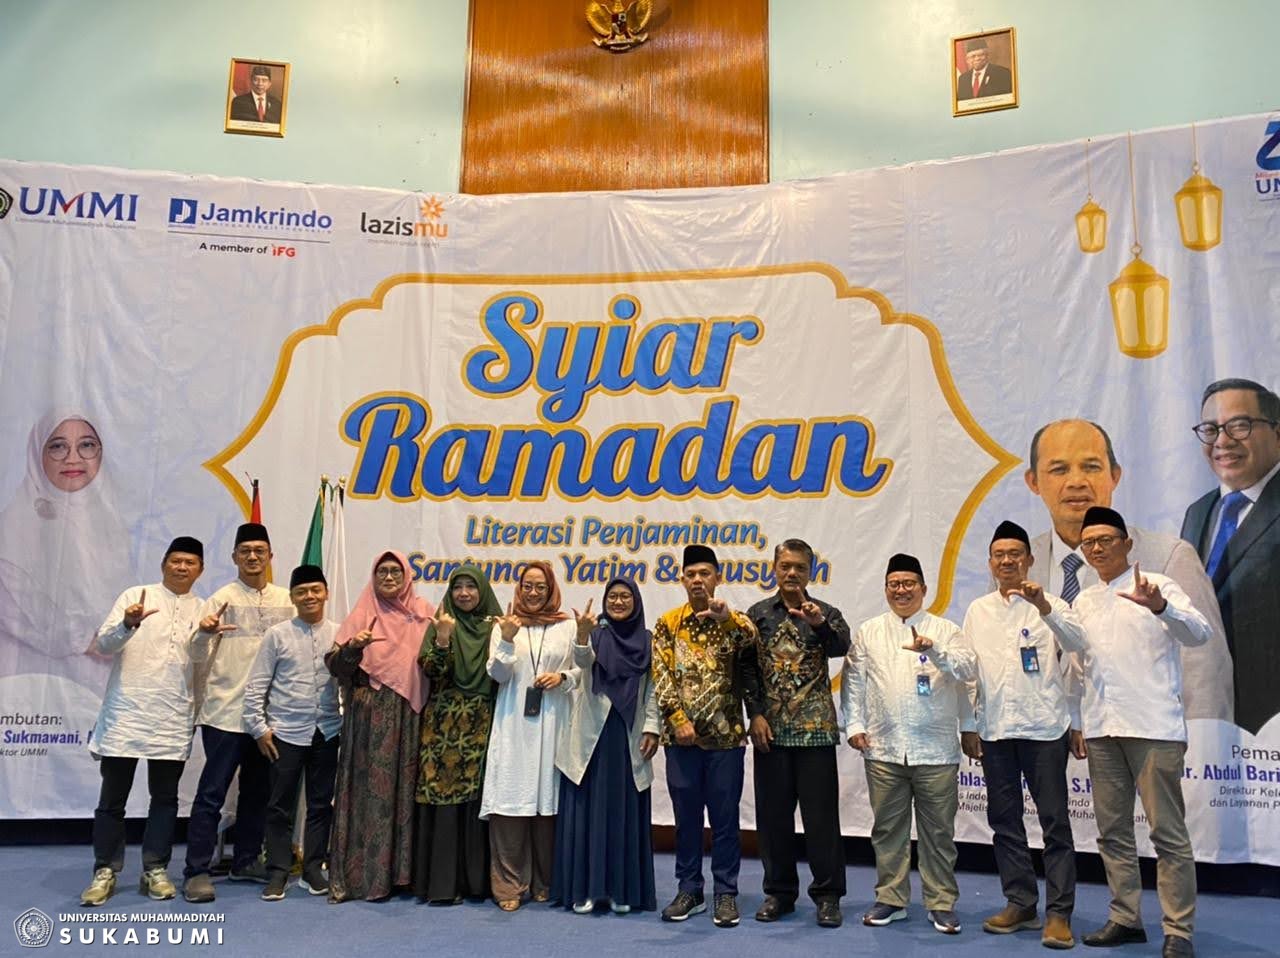 Syiar Ramadan: UMMI Hosts Iftar and Provides Assistance to Hundreds of Orphans